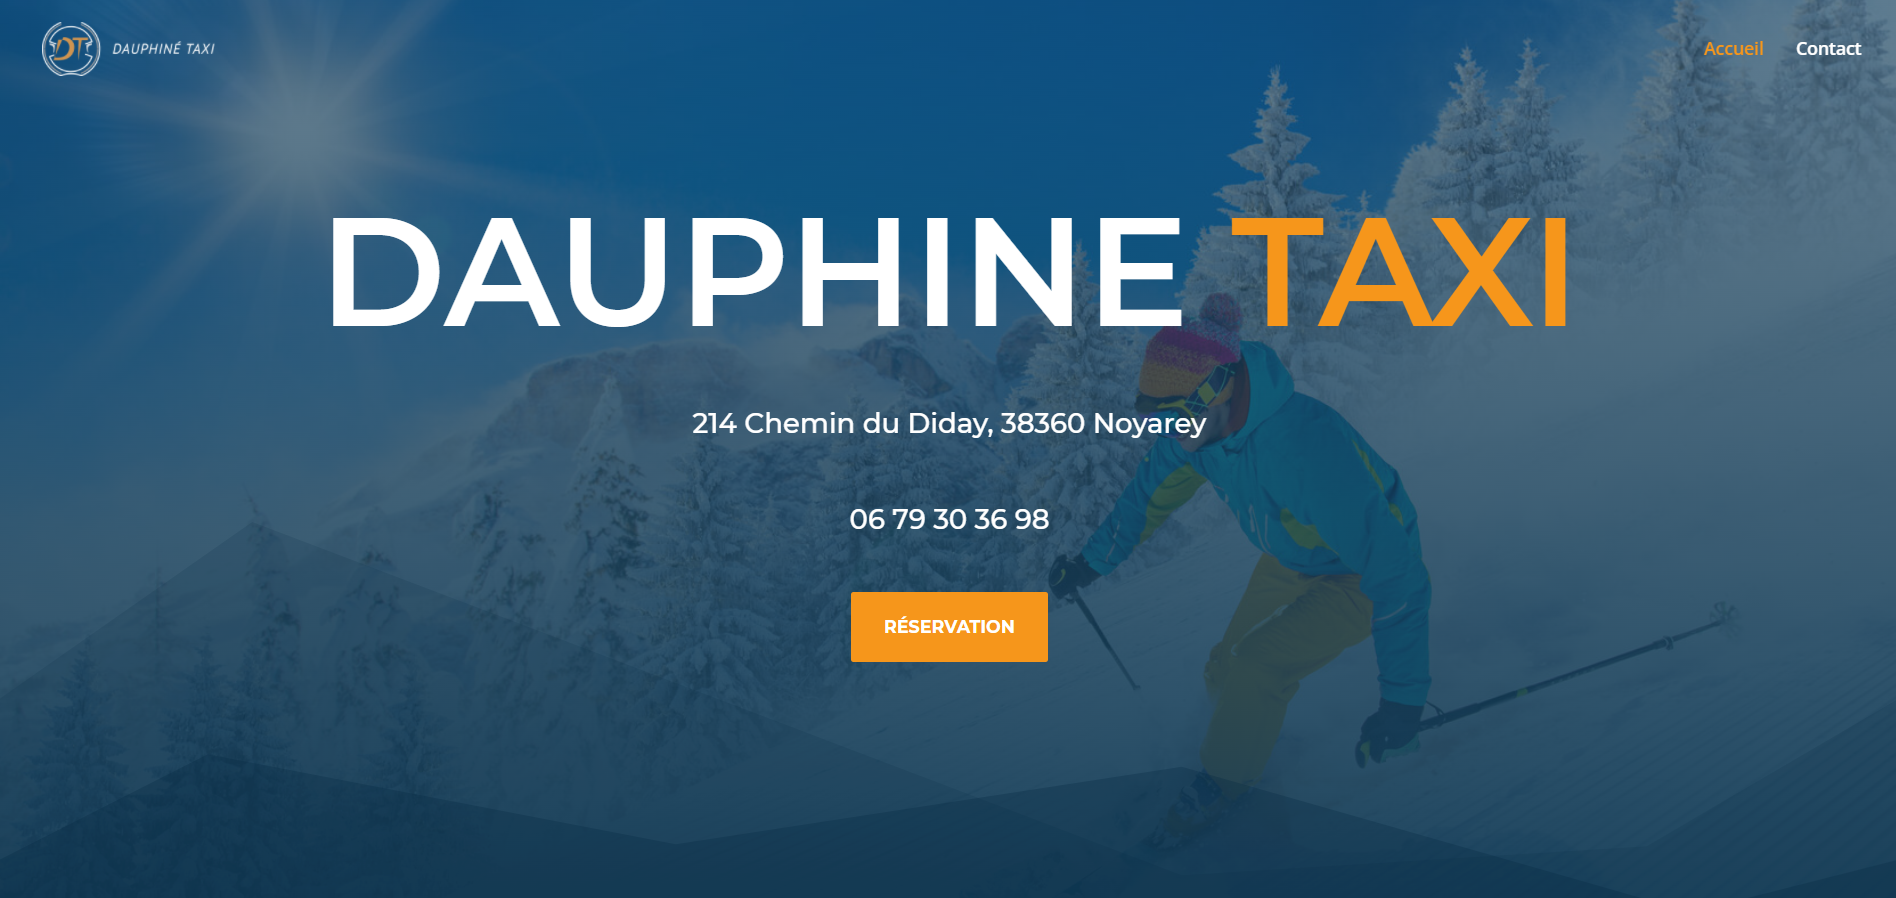 Dauphine Taxi